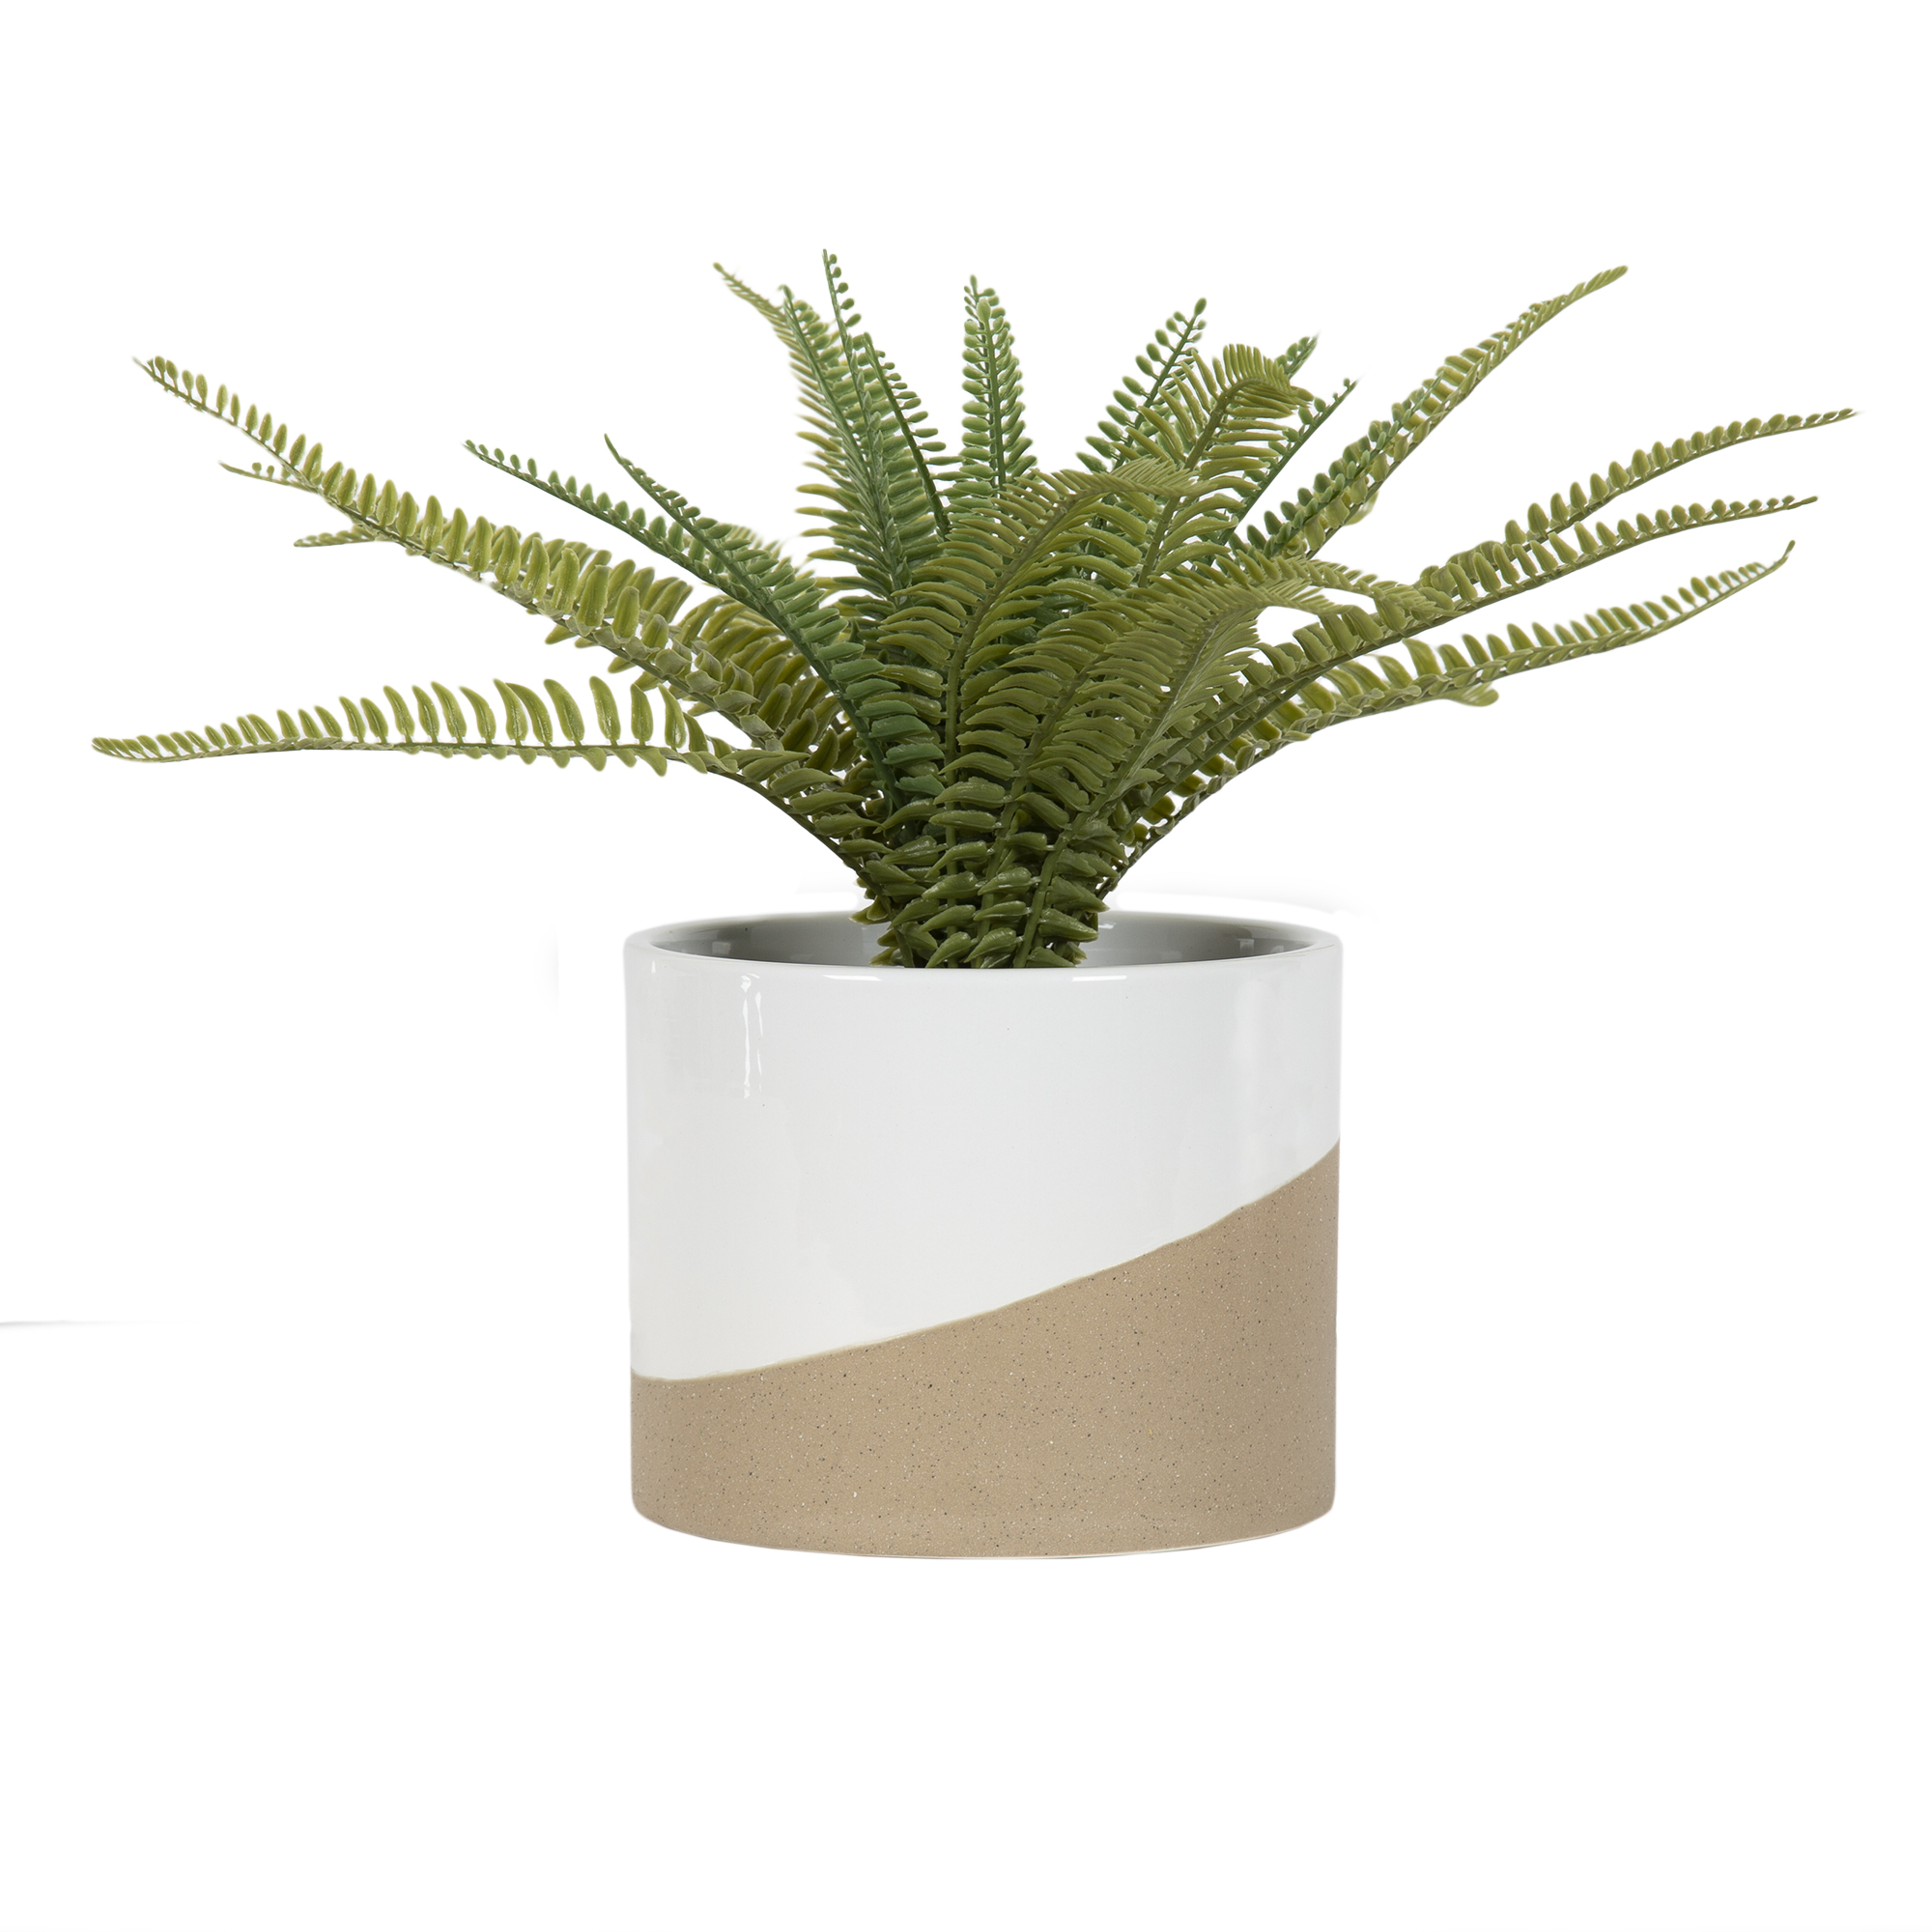 9.25" Artificial Fern Plant in Tan and White Ceramic Pot by Better Homes & Gardens - image 1 of 9